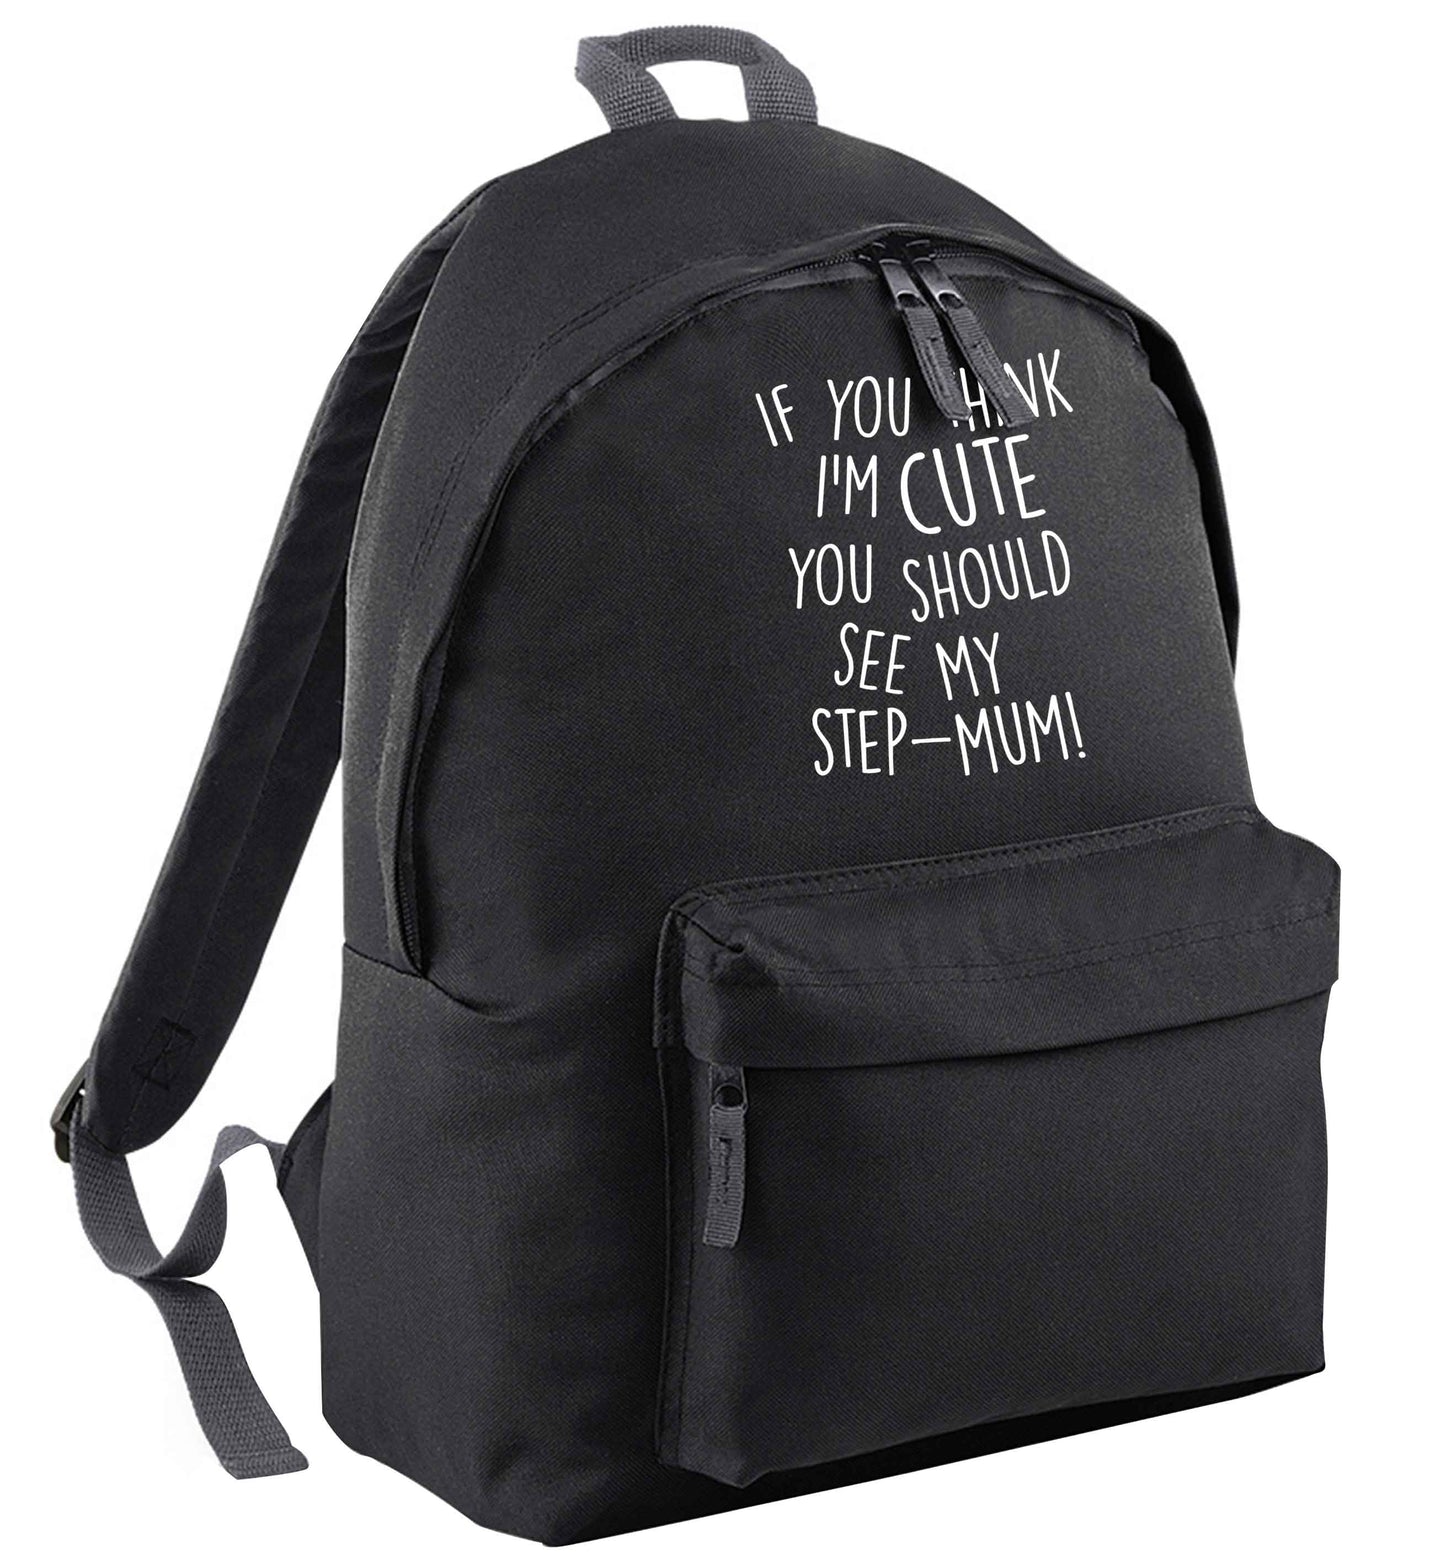 My step-mum loves me to the moon and back | Children's backpack